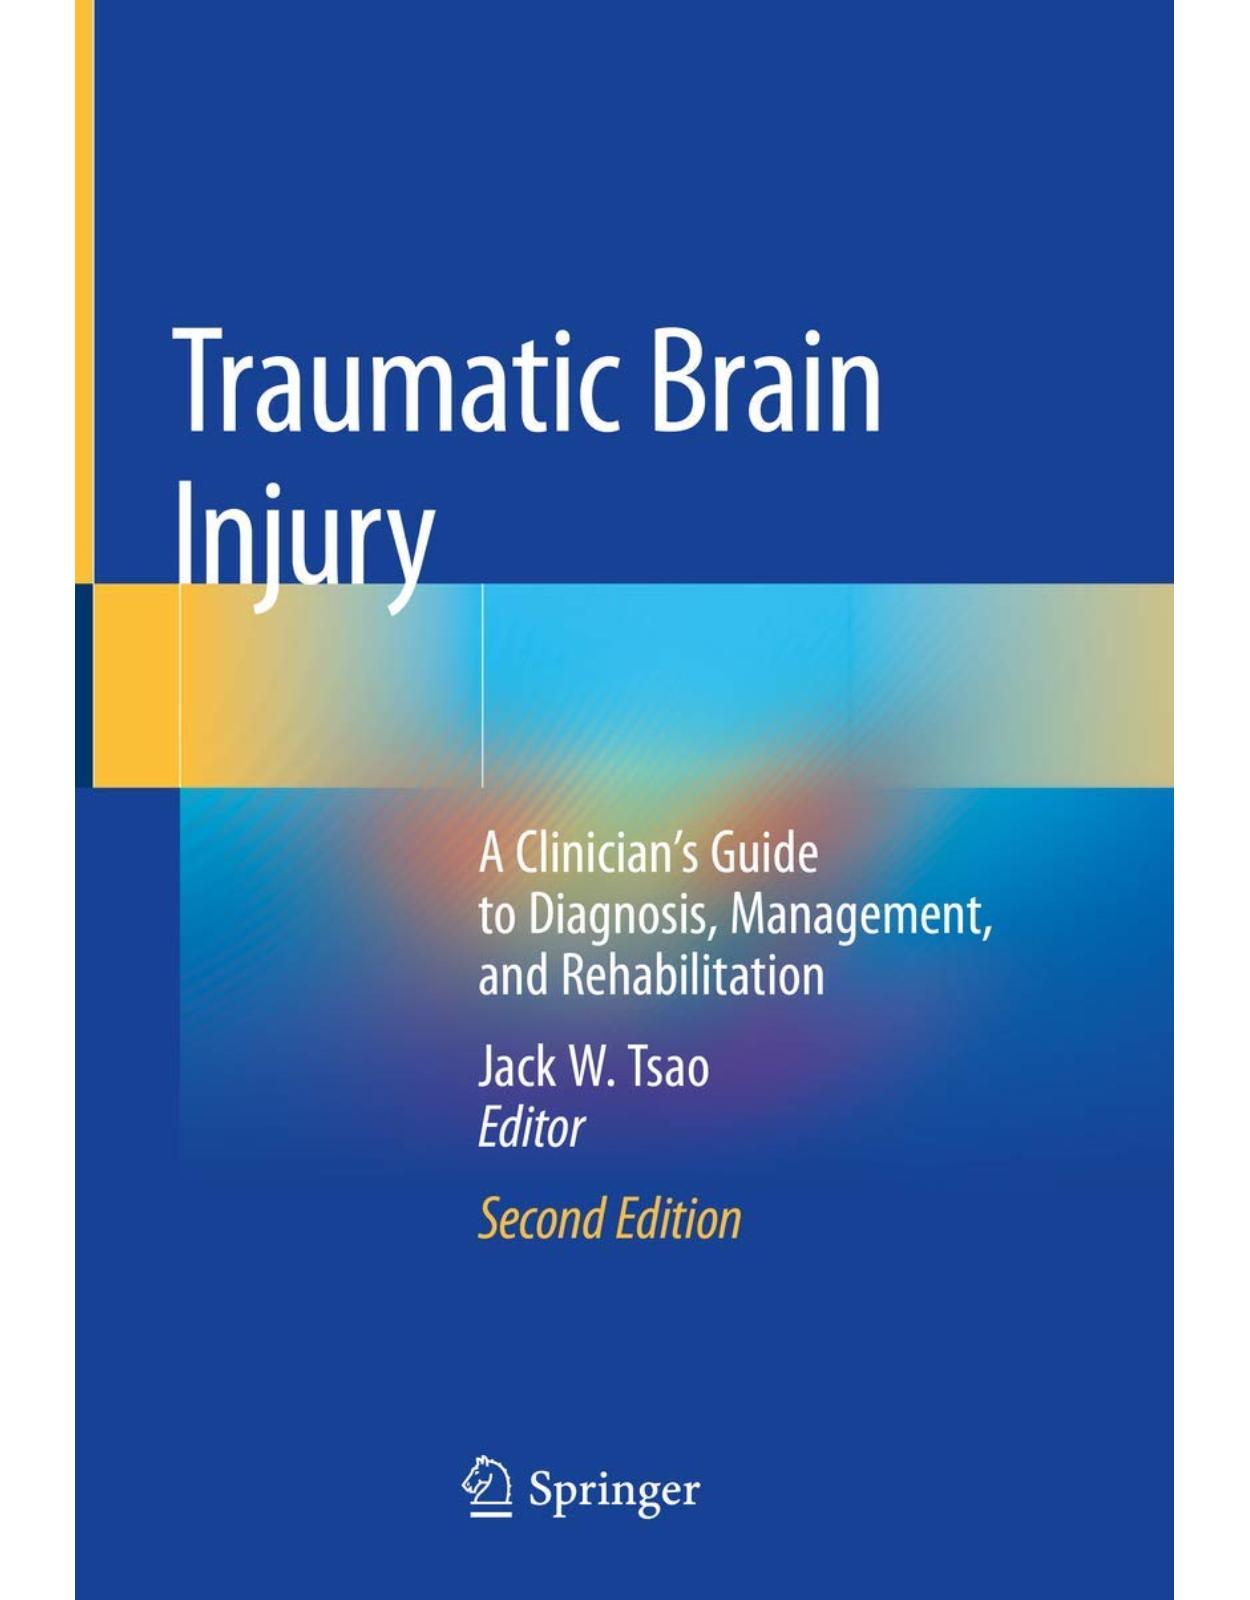 Traumatic Brain Injury: A Clinician’s Guide to Diagnosis, Management, and Rehabilitation